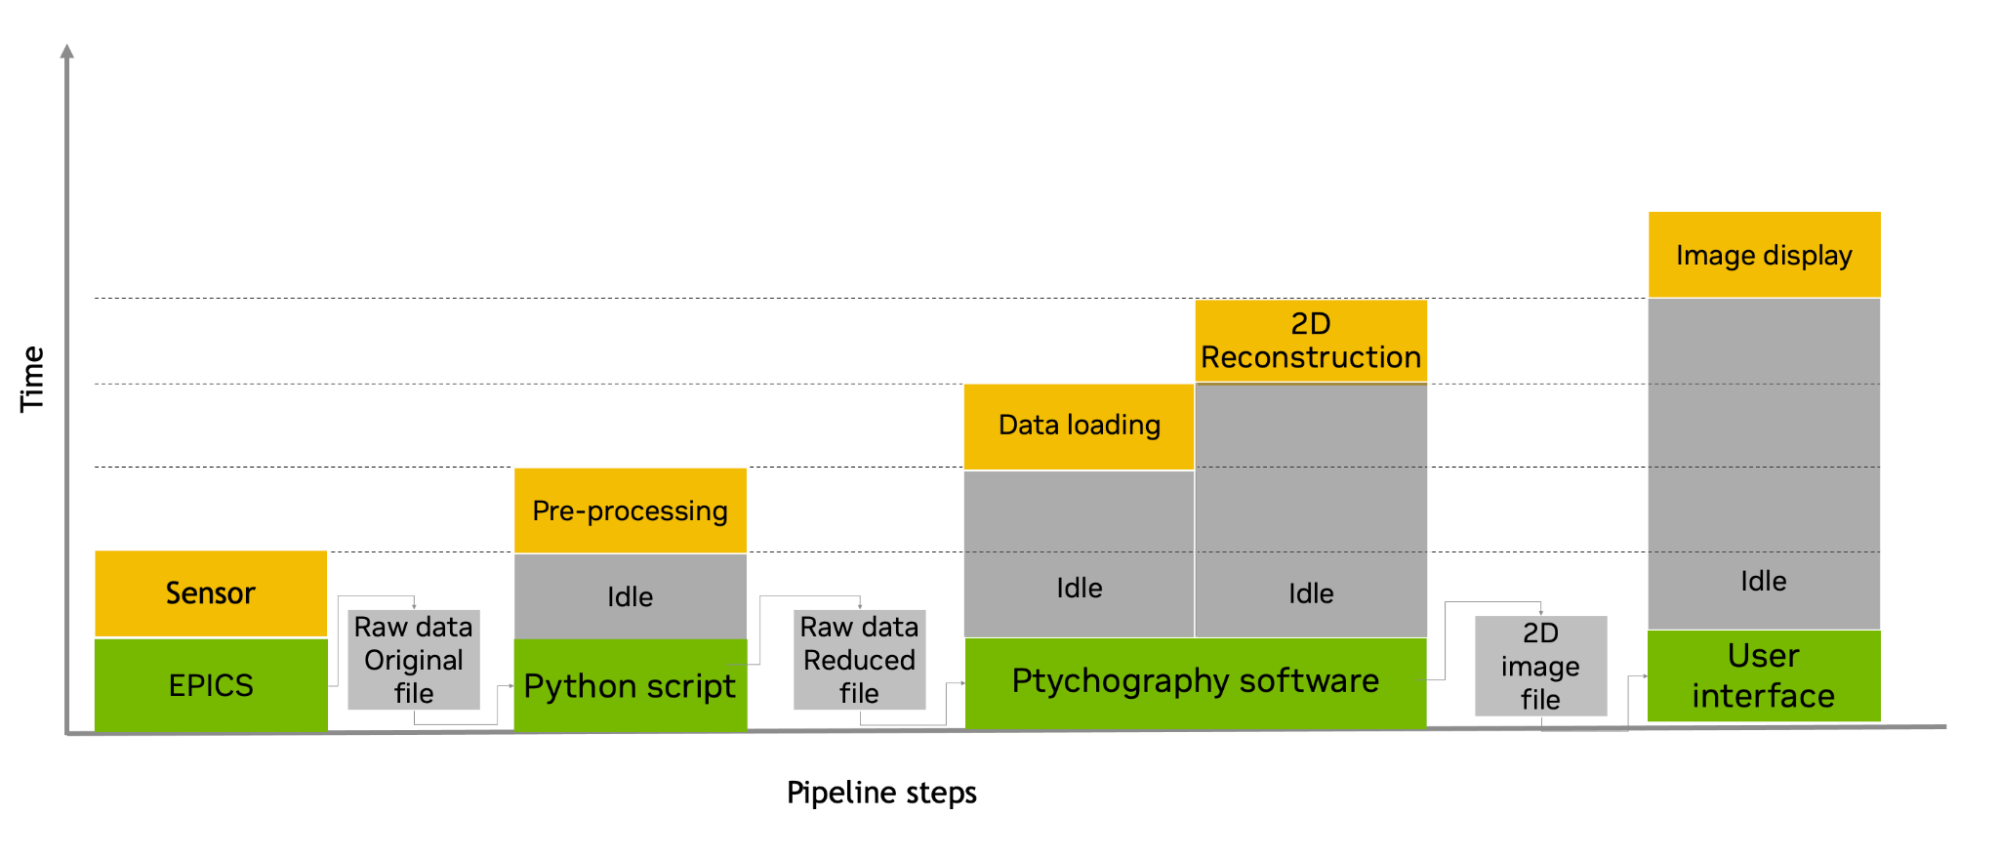 Ptychographic pipeline showing sensor, preprocessing, data loading and 2D reconstruction, and Image display pipeline steps with each step handing off to the next through a written image file.  The delay and idle time grows with each step and is shown on the vertical axis.
